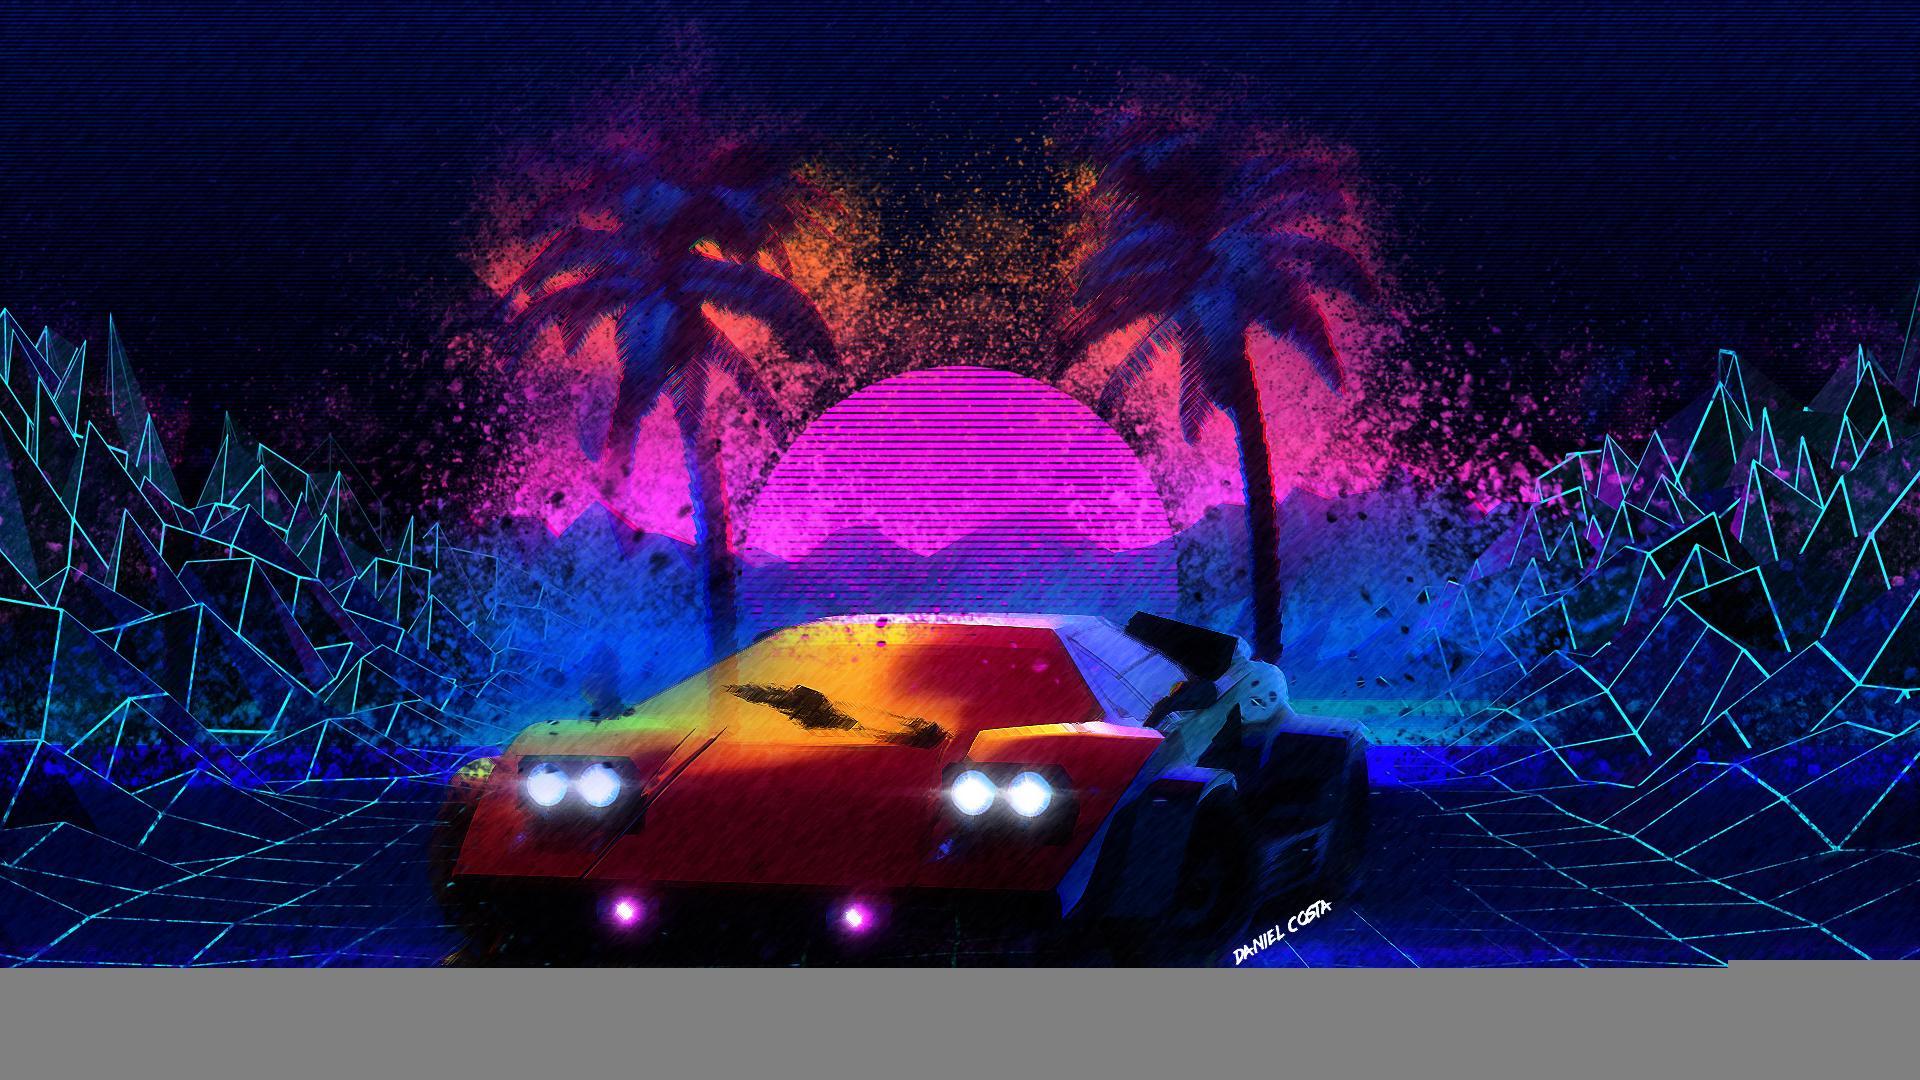 General Synthwave 1980s Car Retrowave Aesthetic Wallpaper